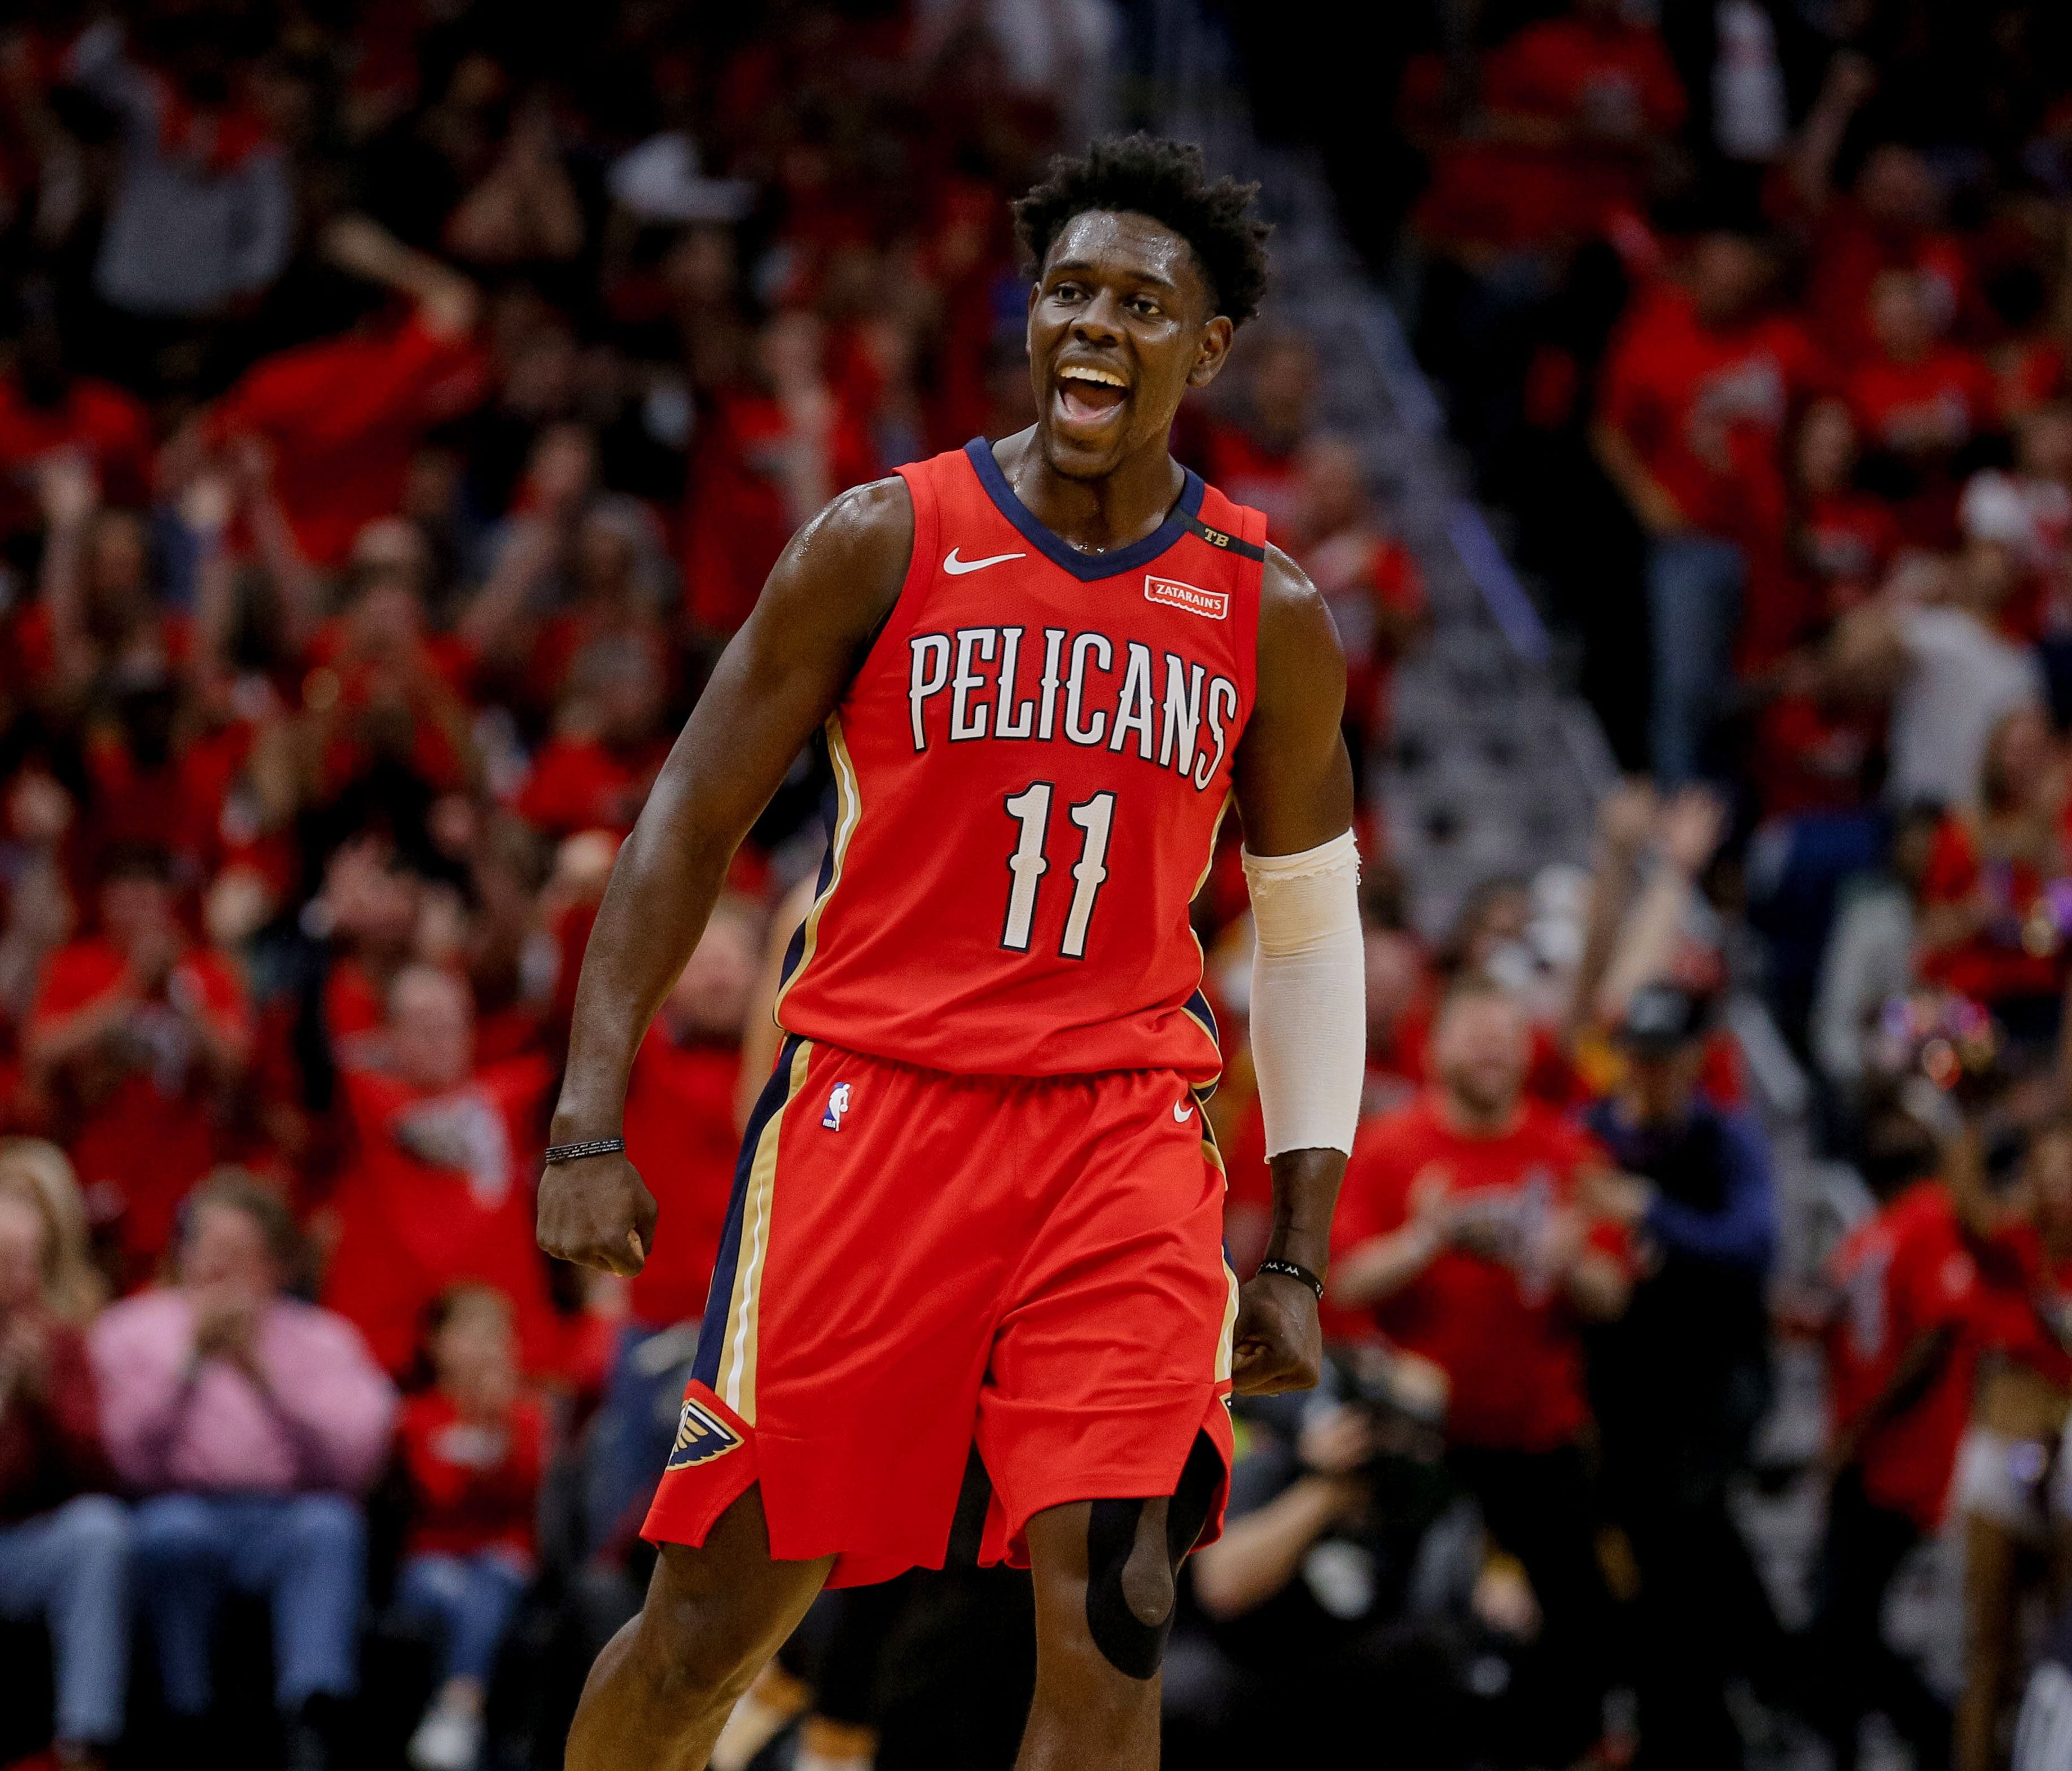 New Orleans Pelicans guard Jrue Holiday (11) reacts after a three point play during the second half in game four of the first round of the 2018 NBA Playoffs against the Portland Trail Blazers at the Smoothie King Center.